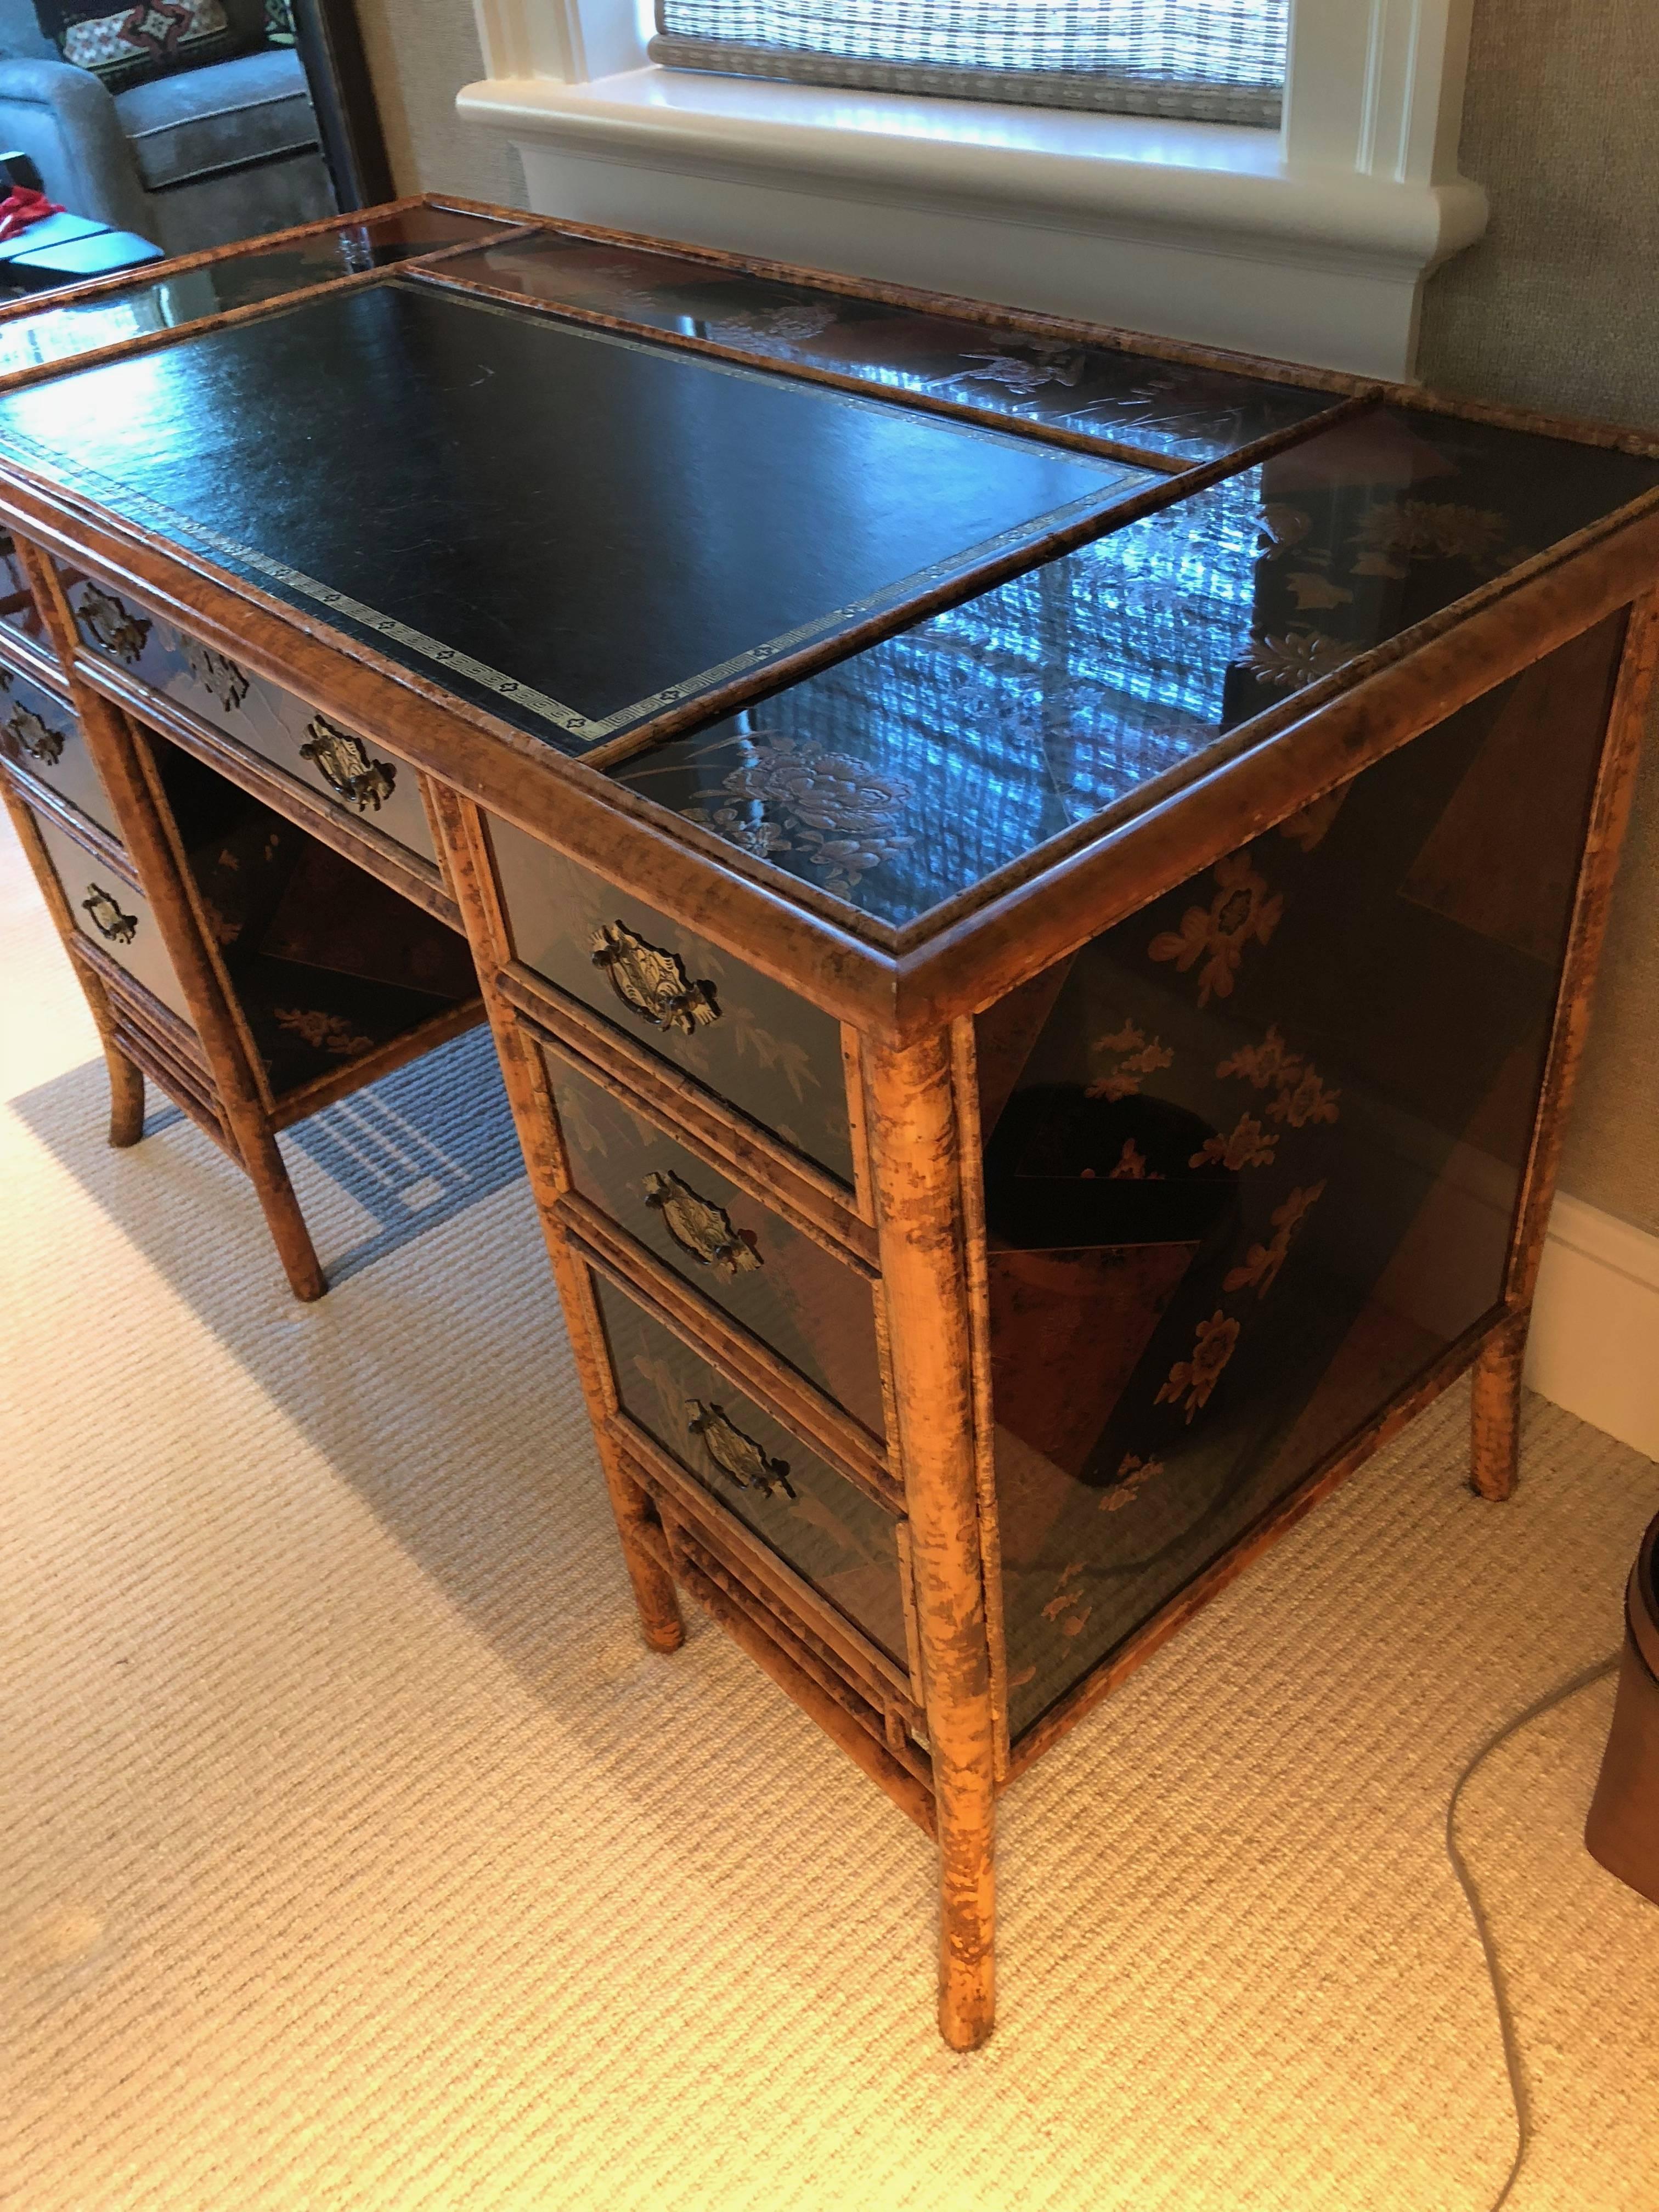 Bamboo English desk having seven drawers finished and decorated with hand-painted design and lacquer panels in the Japanese style well taken care of. Hand-painted on four sides made popular when commodore Perry opened Japan.